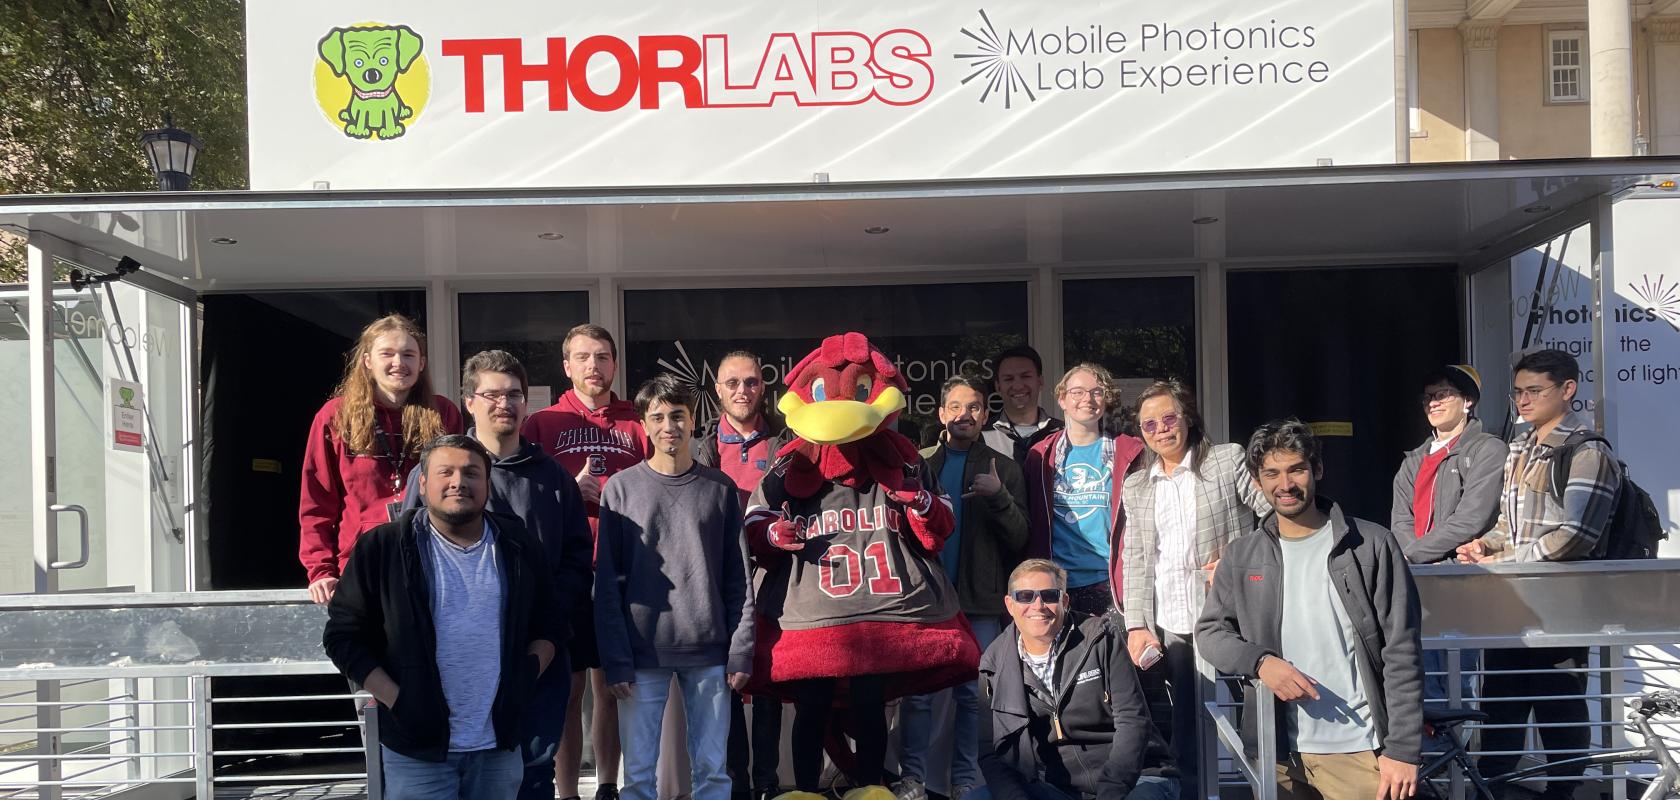 The Thorlabs Mobile Lab Experience